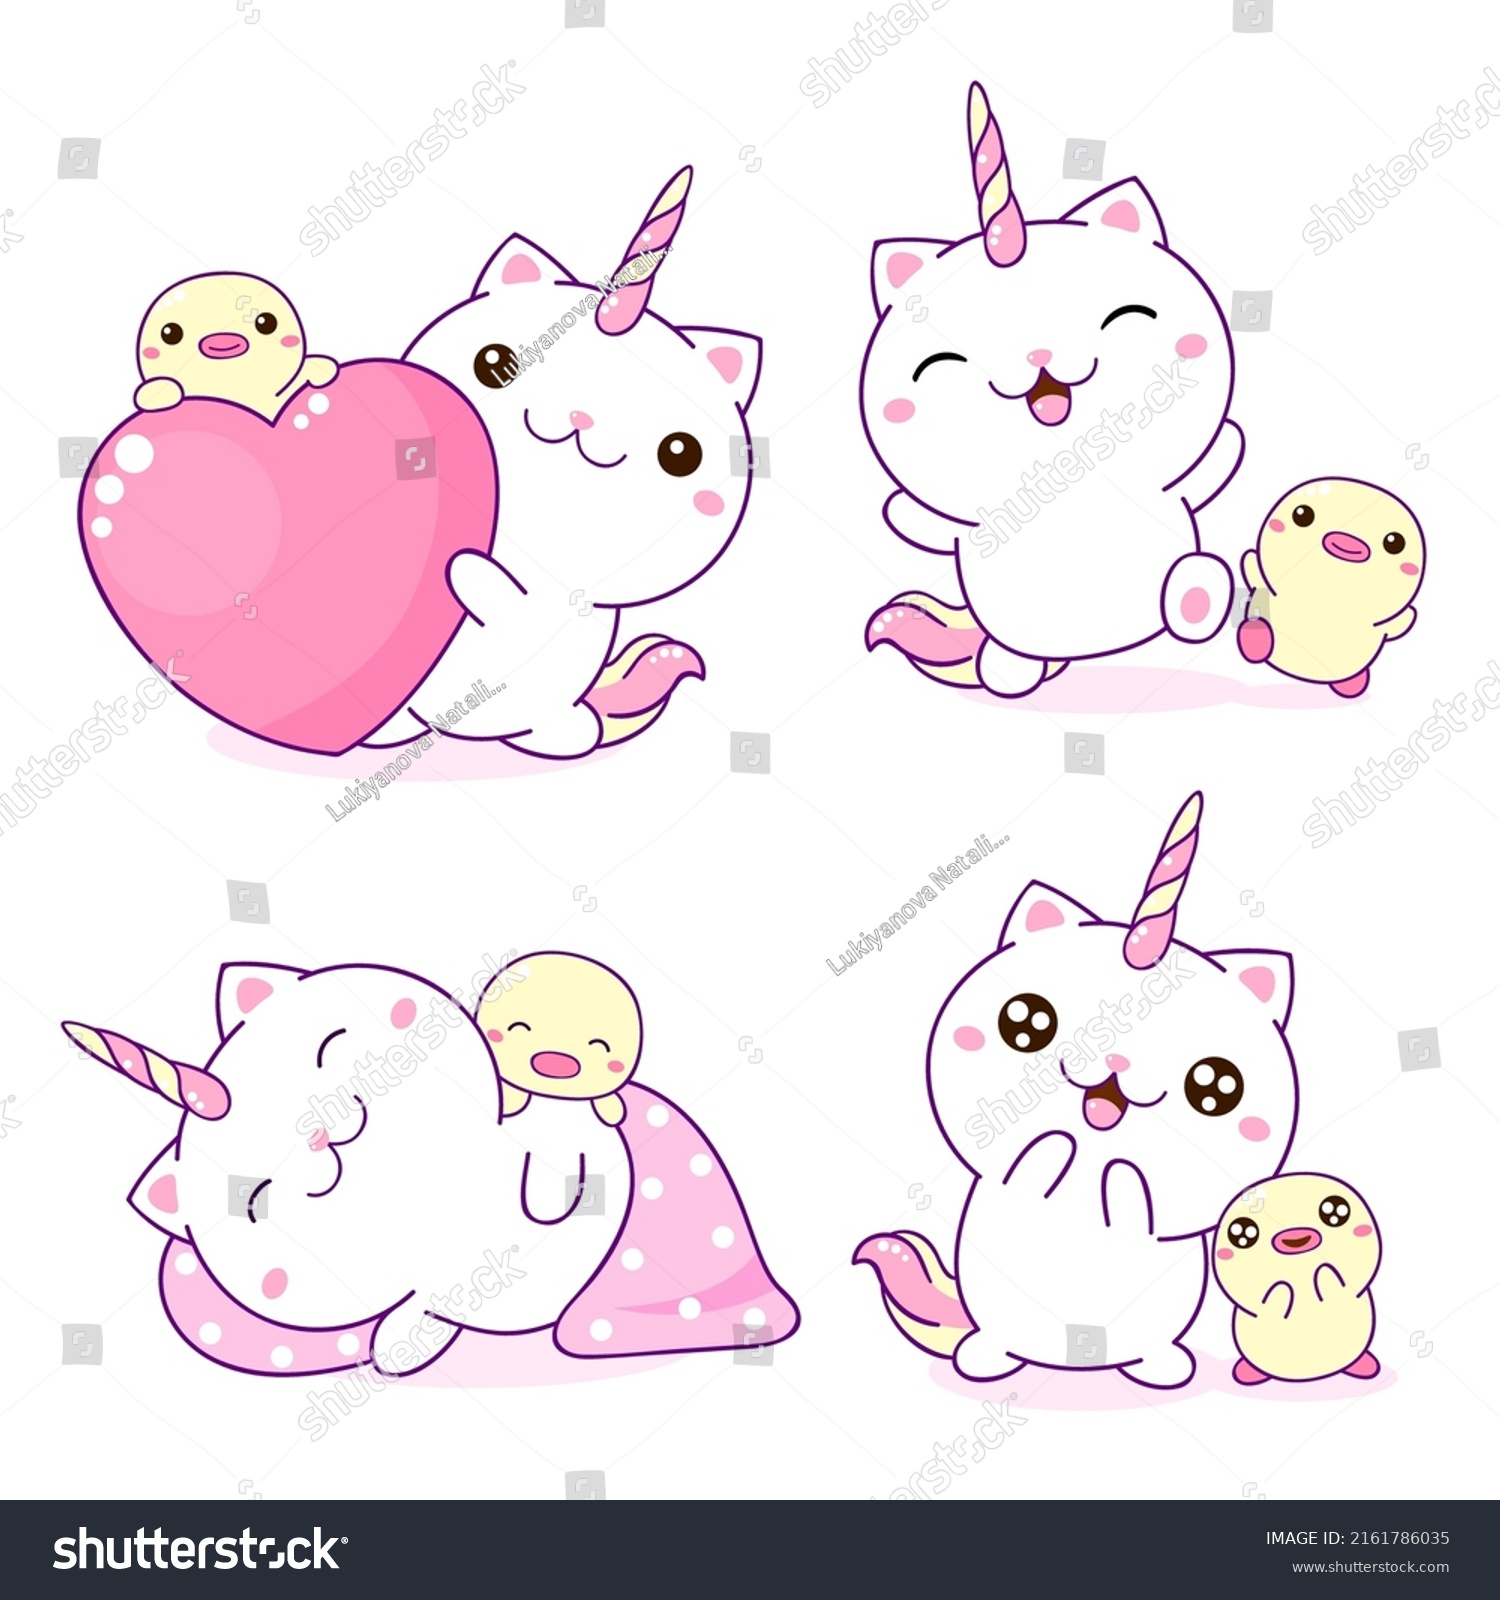 SVG of Set of kawaii caticorn and duckling. Cute little friends - duck and caticorn playing, sleeping, with heart. Vector illustration EPS8 svg